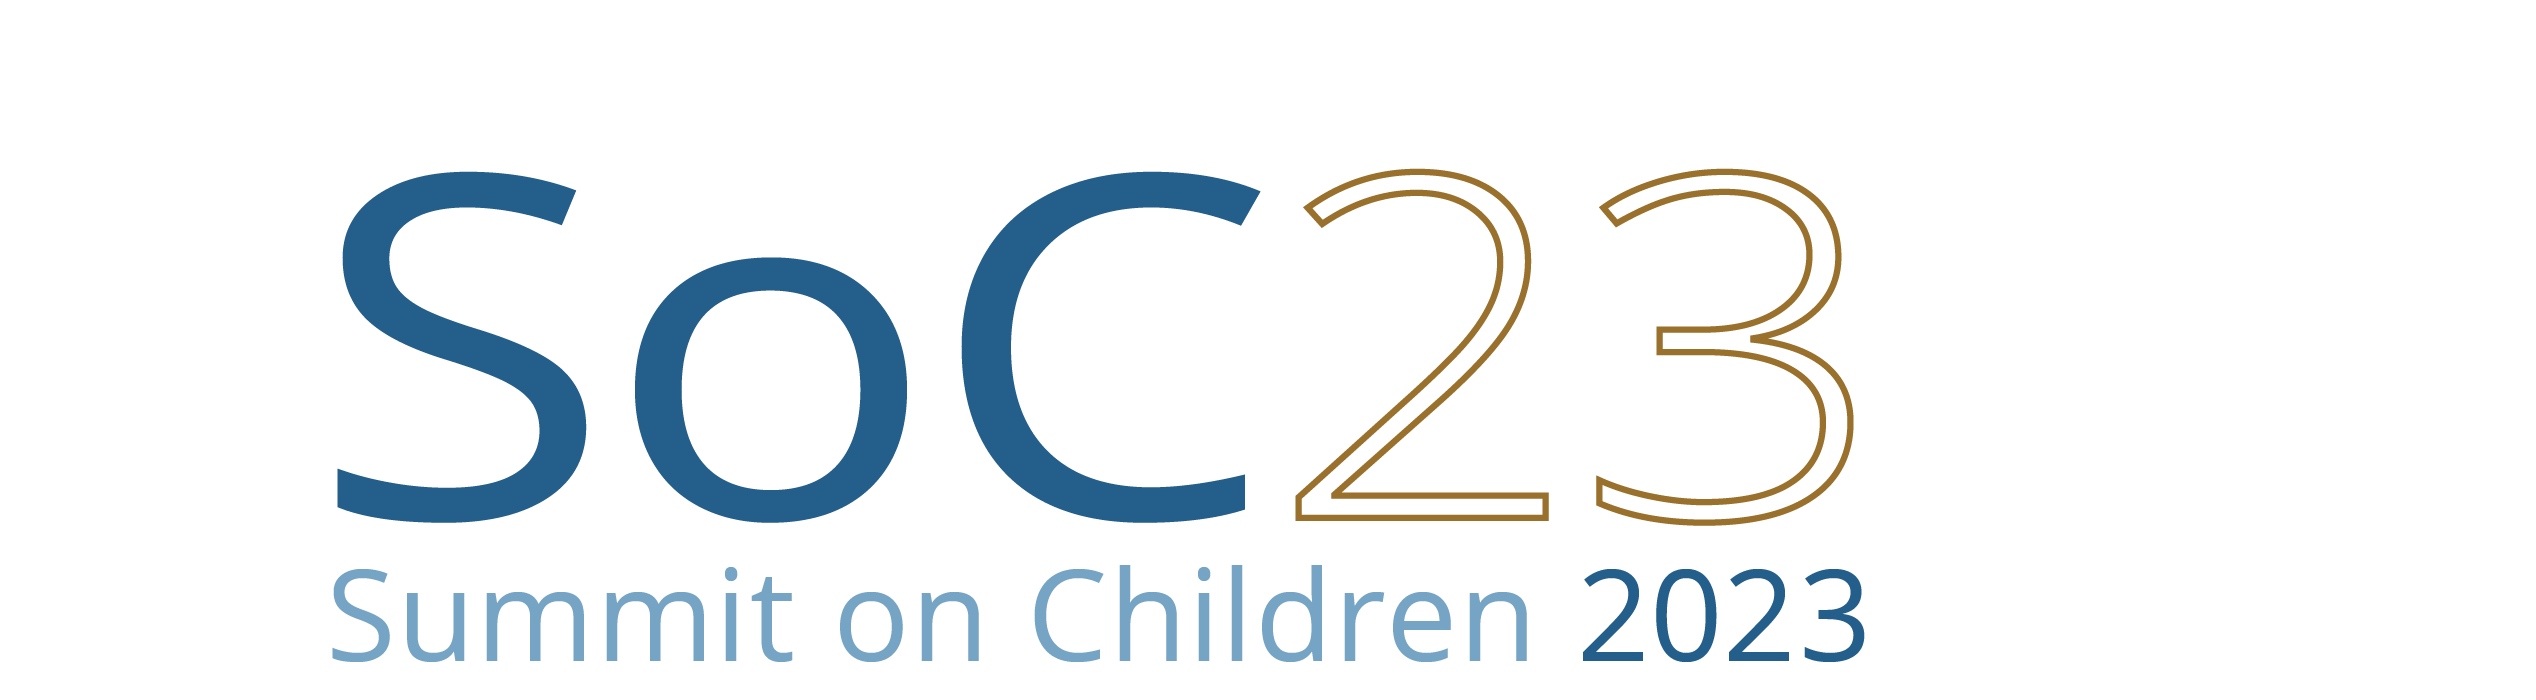 Image of a capital letter S, lowercase letter O, capital letter C followed by the number 23 above the words 'Summit on Children 2023'